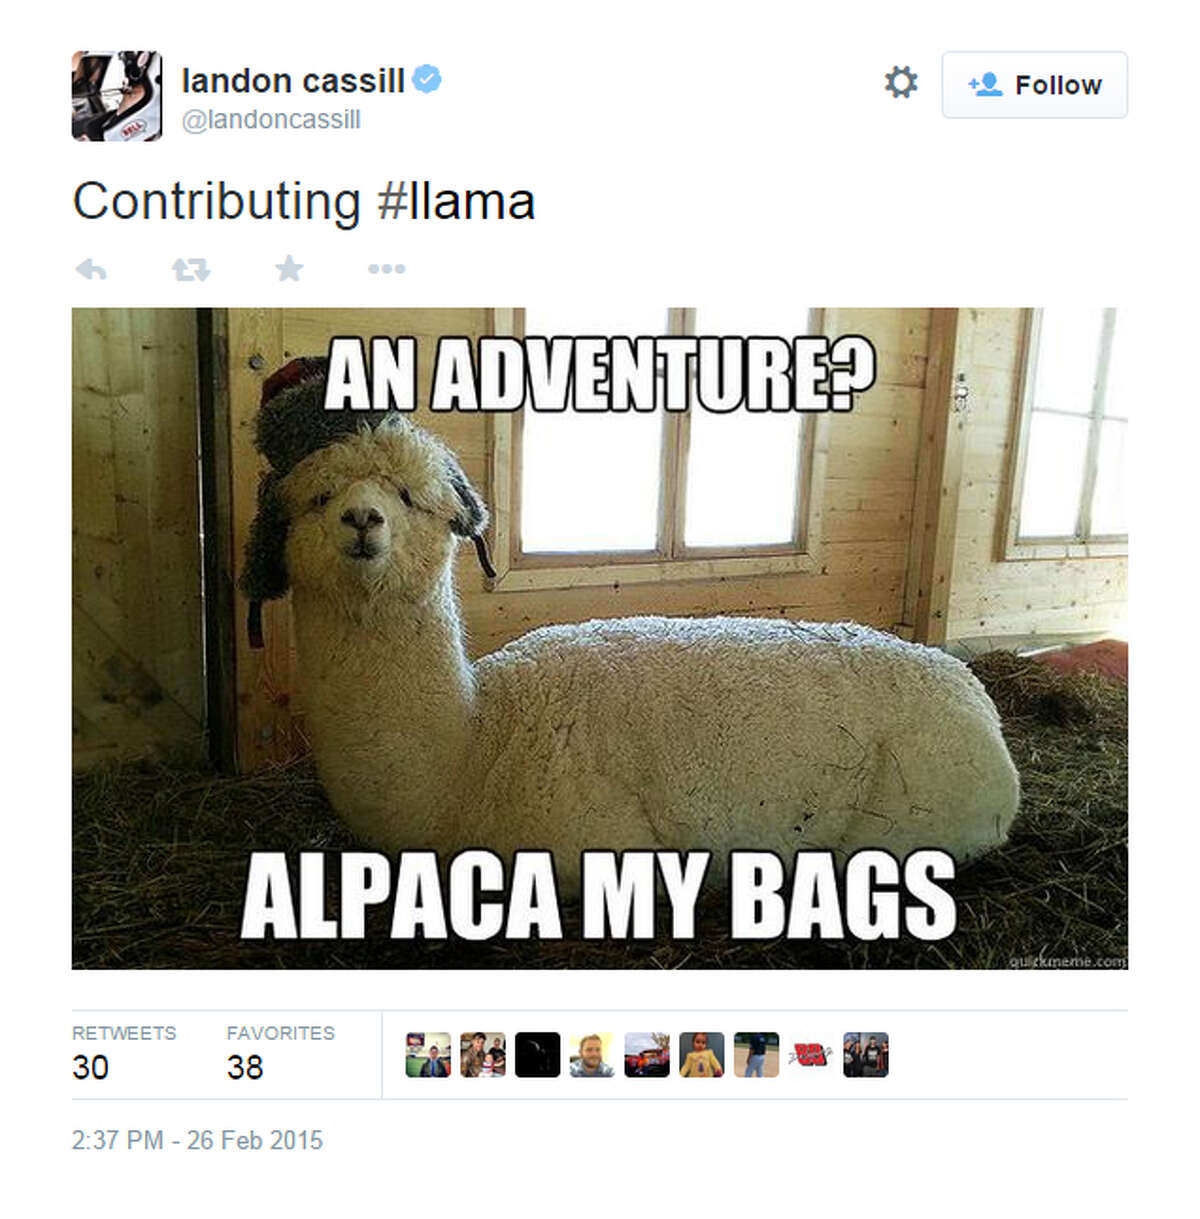 Twitter exploded with llama tweets as the Internet reacted two llamas evading capture during a televised chase for nearly an hour in Arizona on Thursday, Feb. 26, 2015.